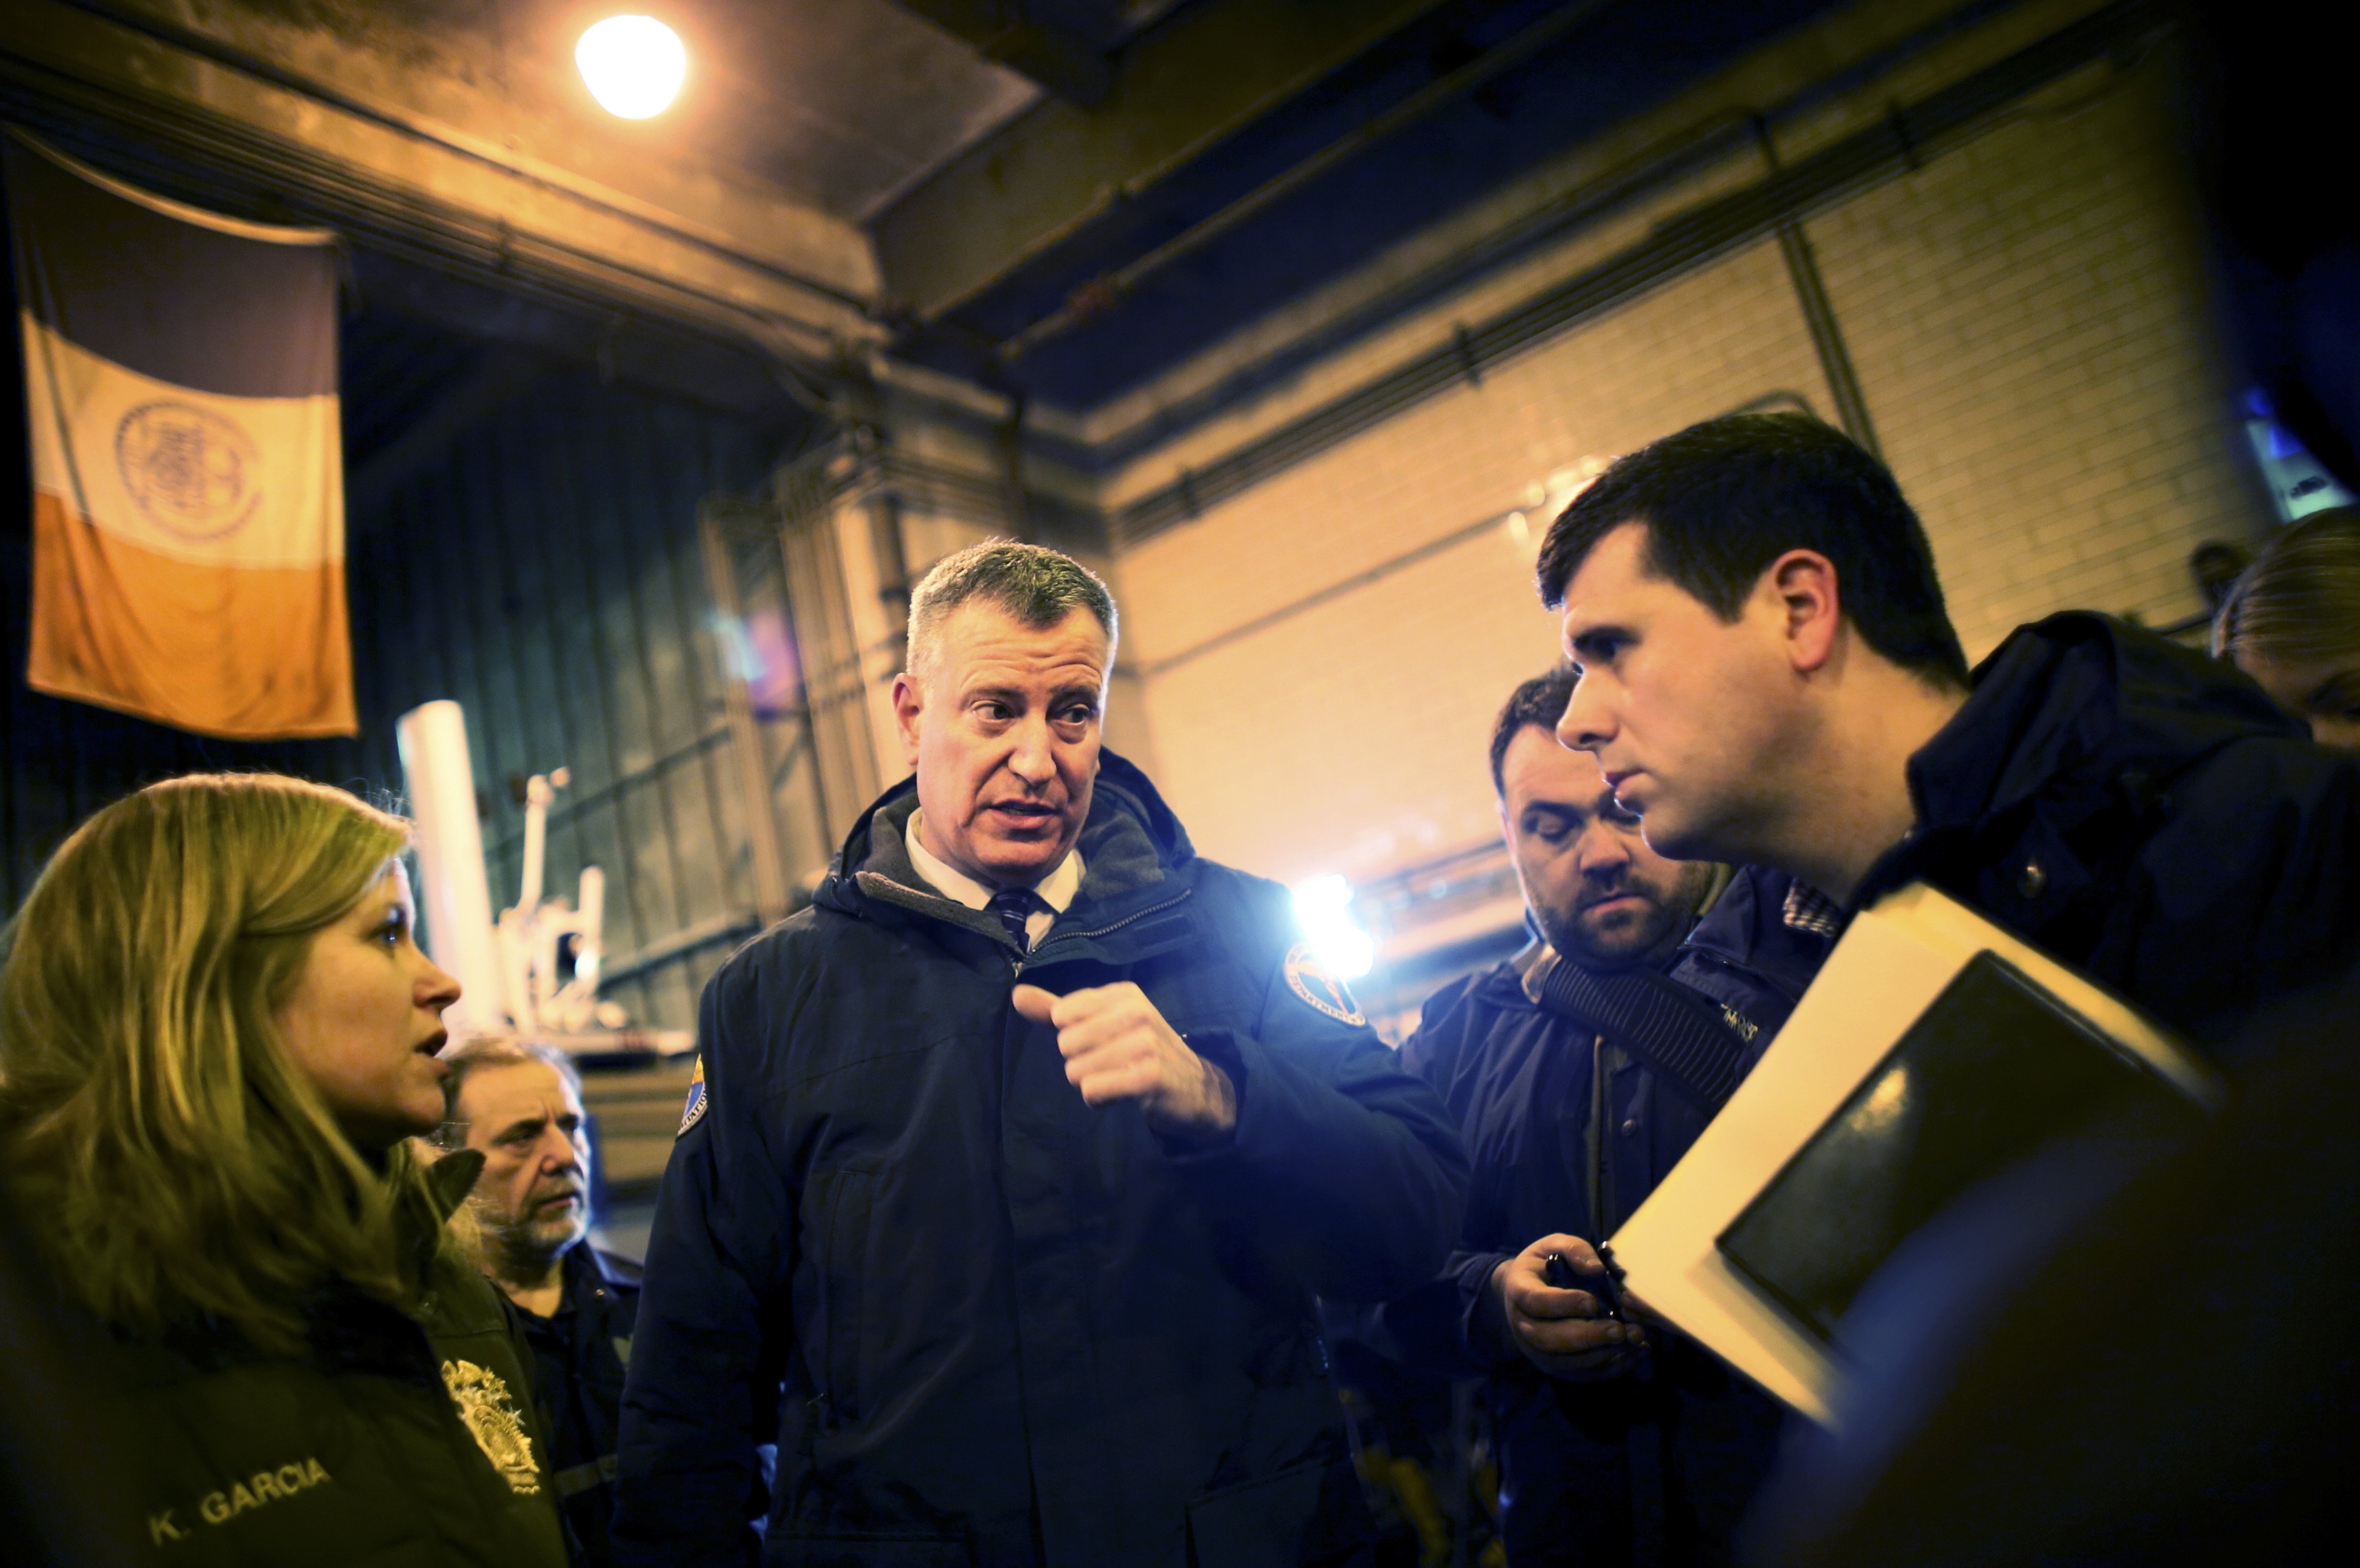 New York City Mayor Bill de Blasio exits a news conference with Department of Sanitation workers in preparation for a blizzard in New York City, Jan. 26, 2015. (Yana Paskova—The New York Times/Redux)